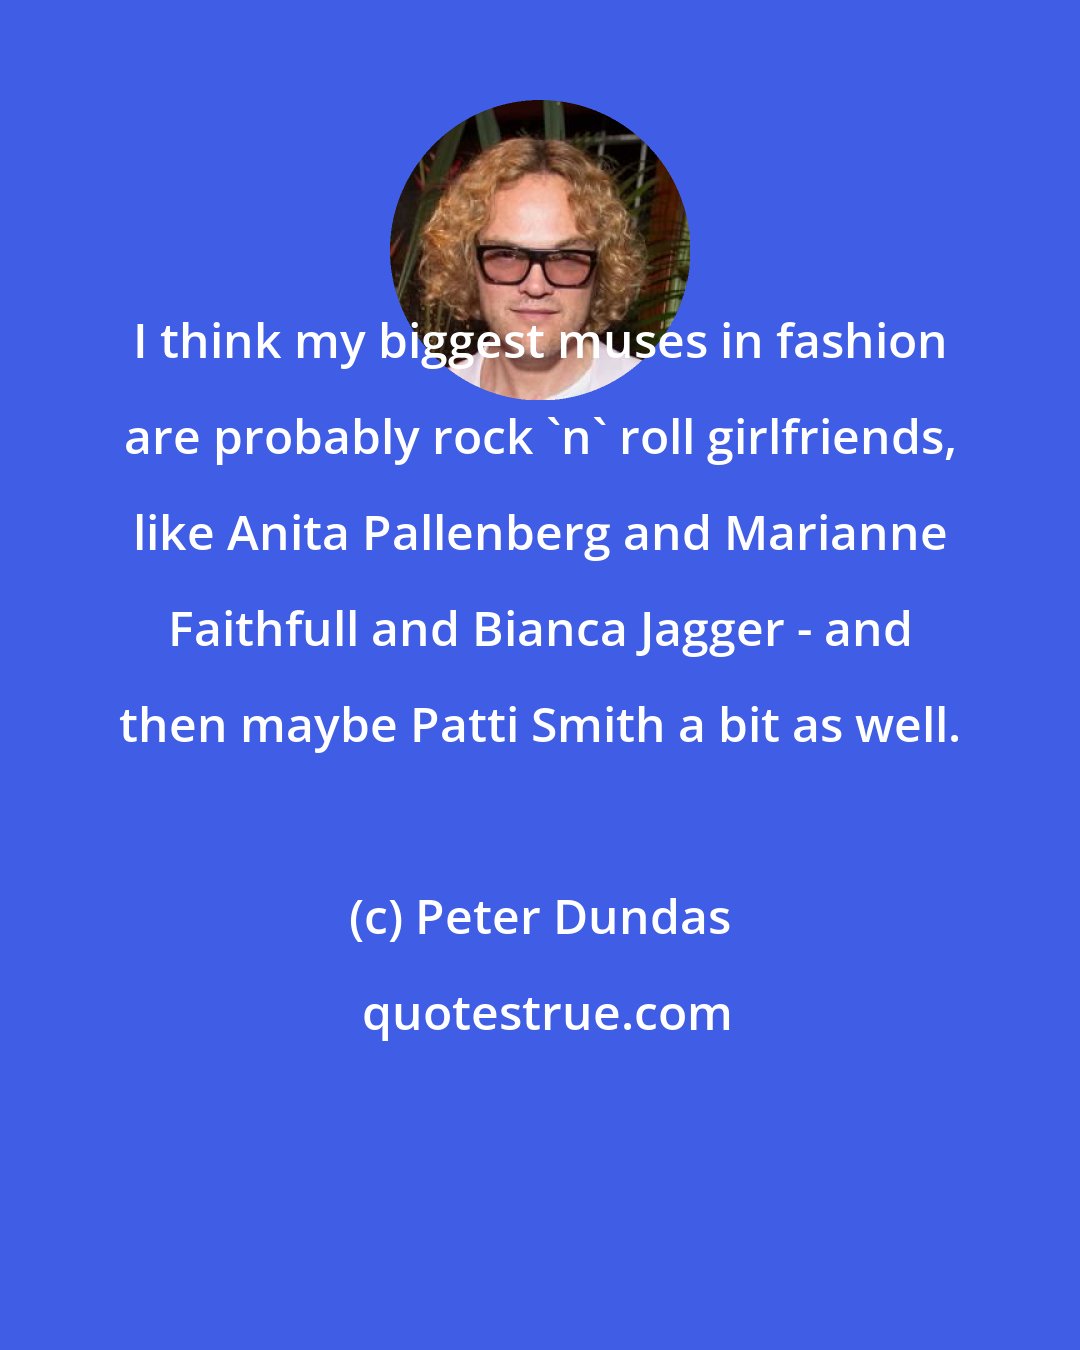 Peter Dundas: I think my biggest muses in fashion are probably rock 'n' roll girlfriends, like Anita Pallenberg and Marianne Faithfull and Bianca Jagger - and then maybe Patti Smith a bit as well.